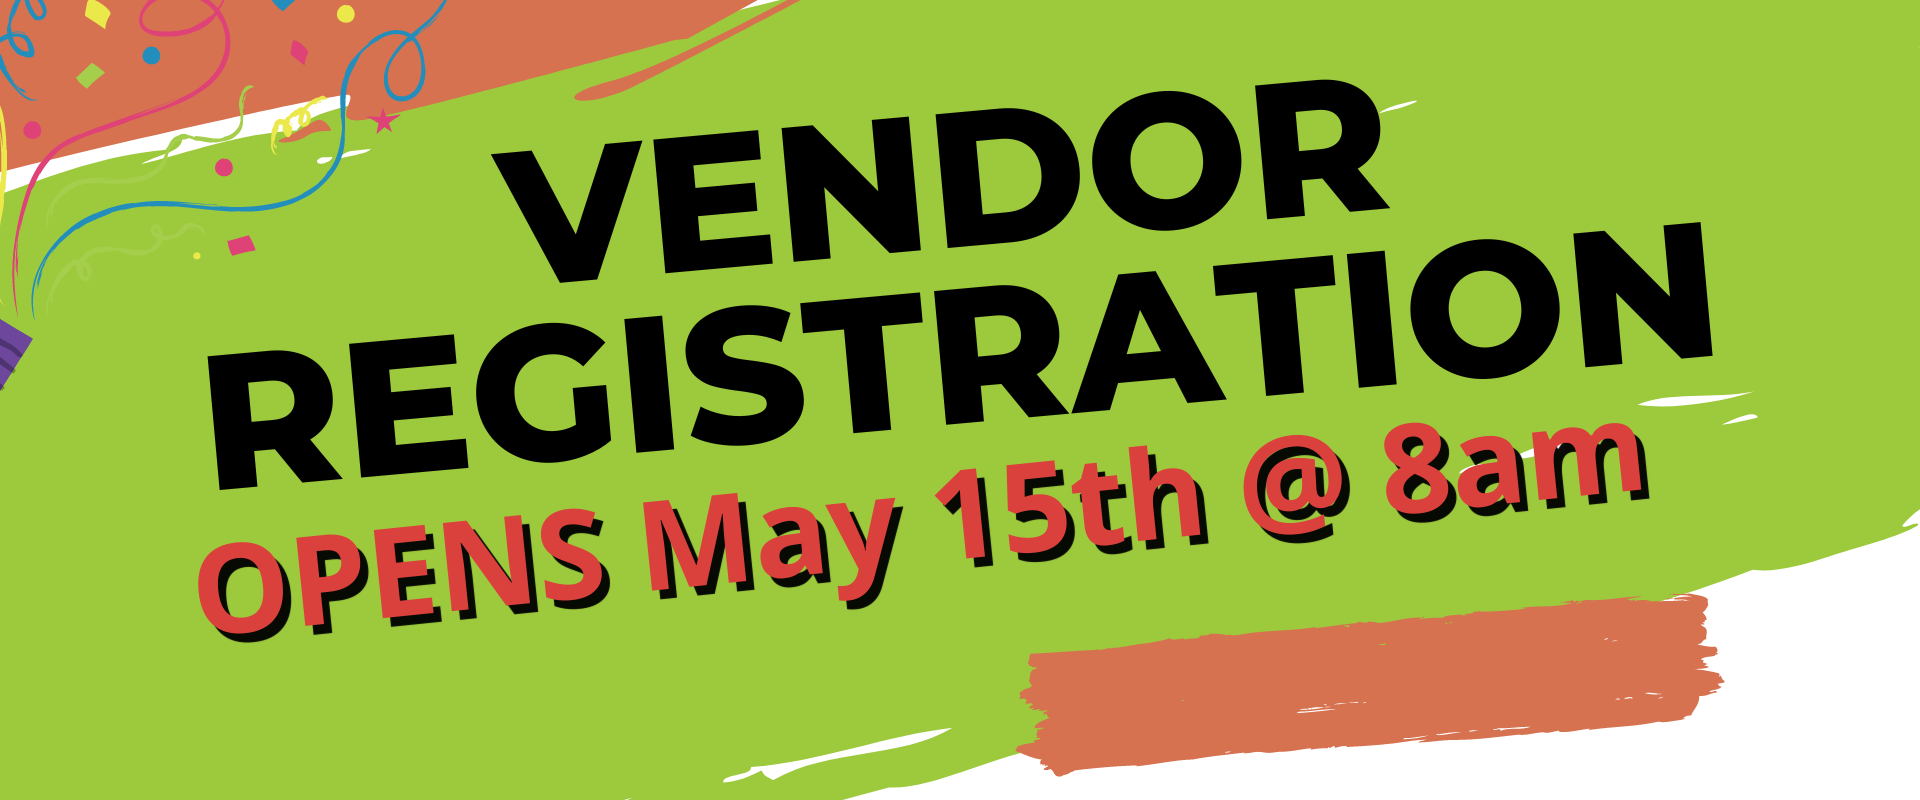 Registration opens on May 15th for Artist Alley, Crafters Cove, Business Showcase, Food Vendors and Community Showcase